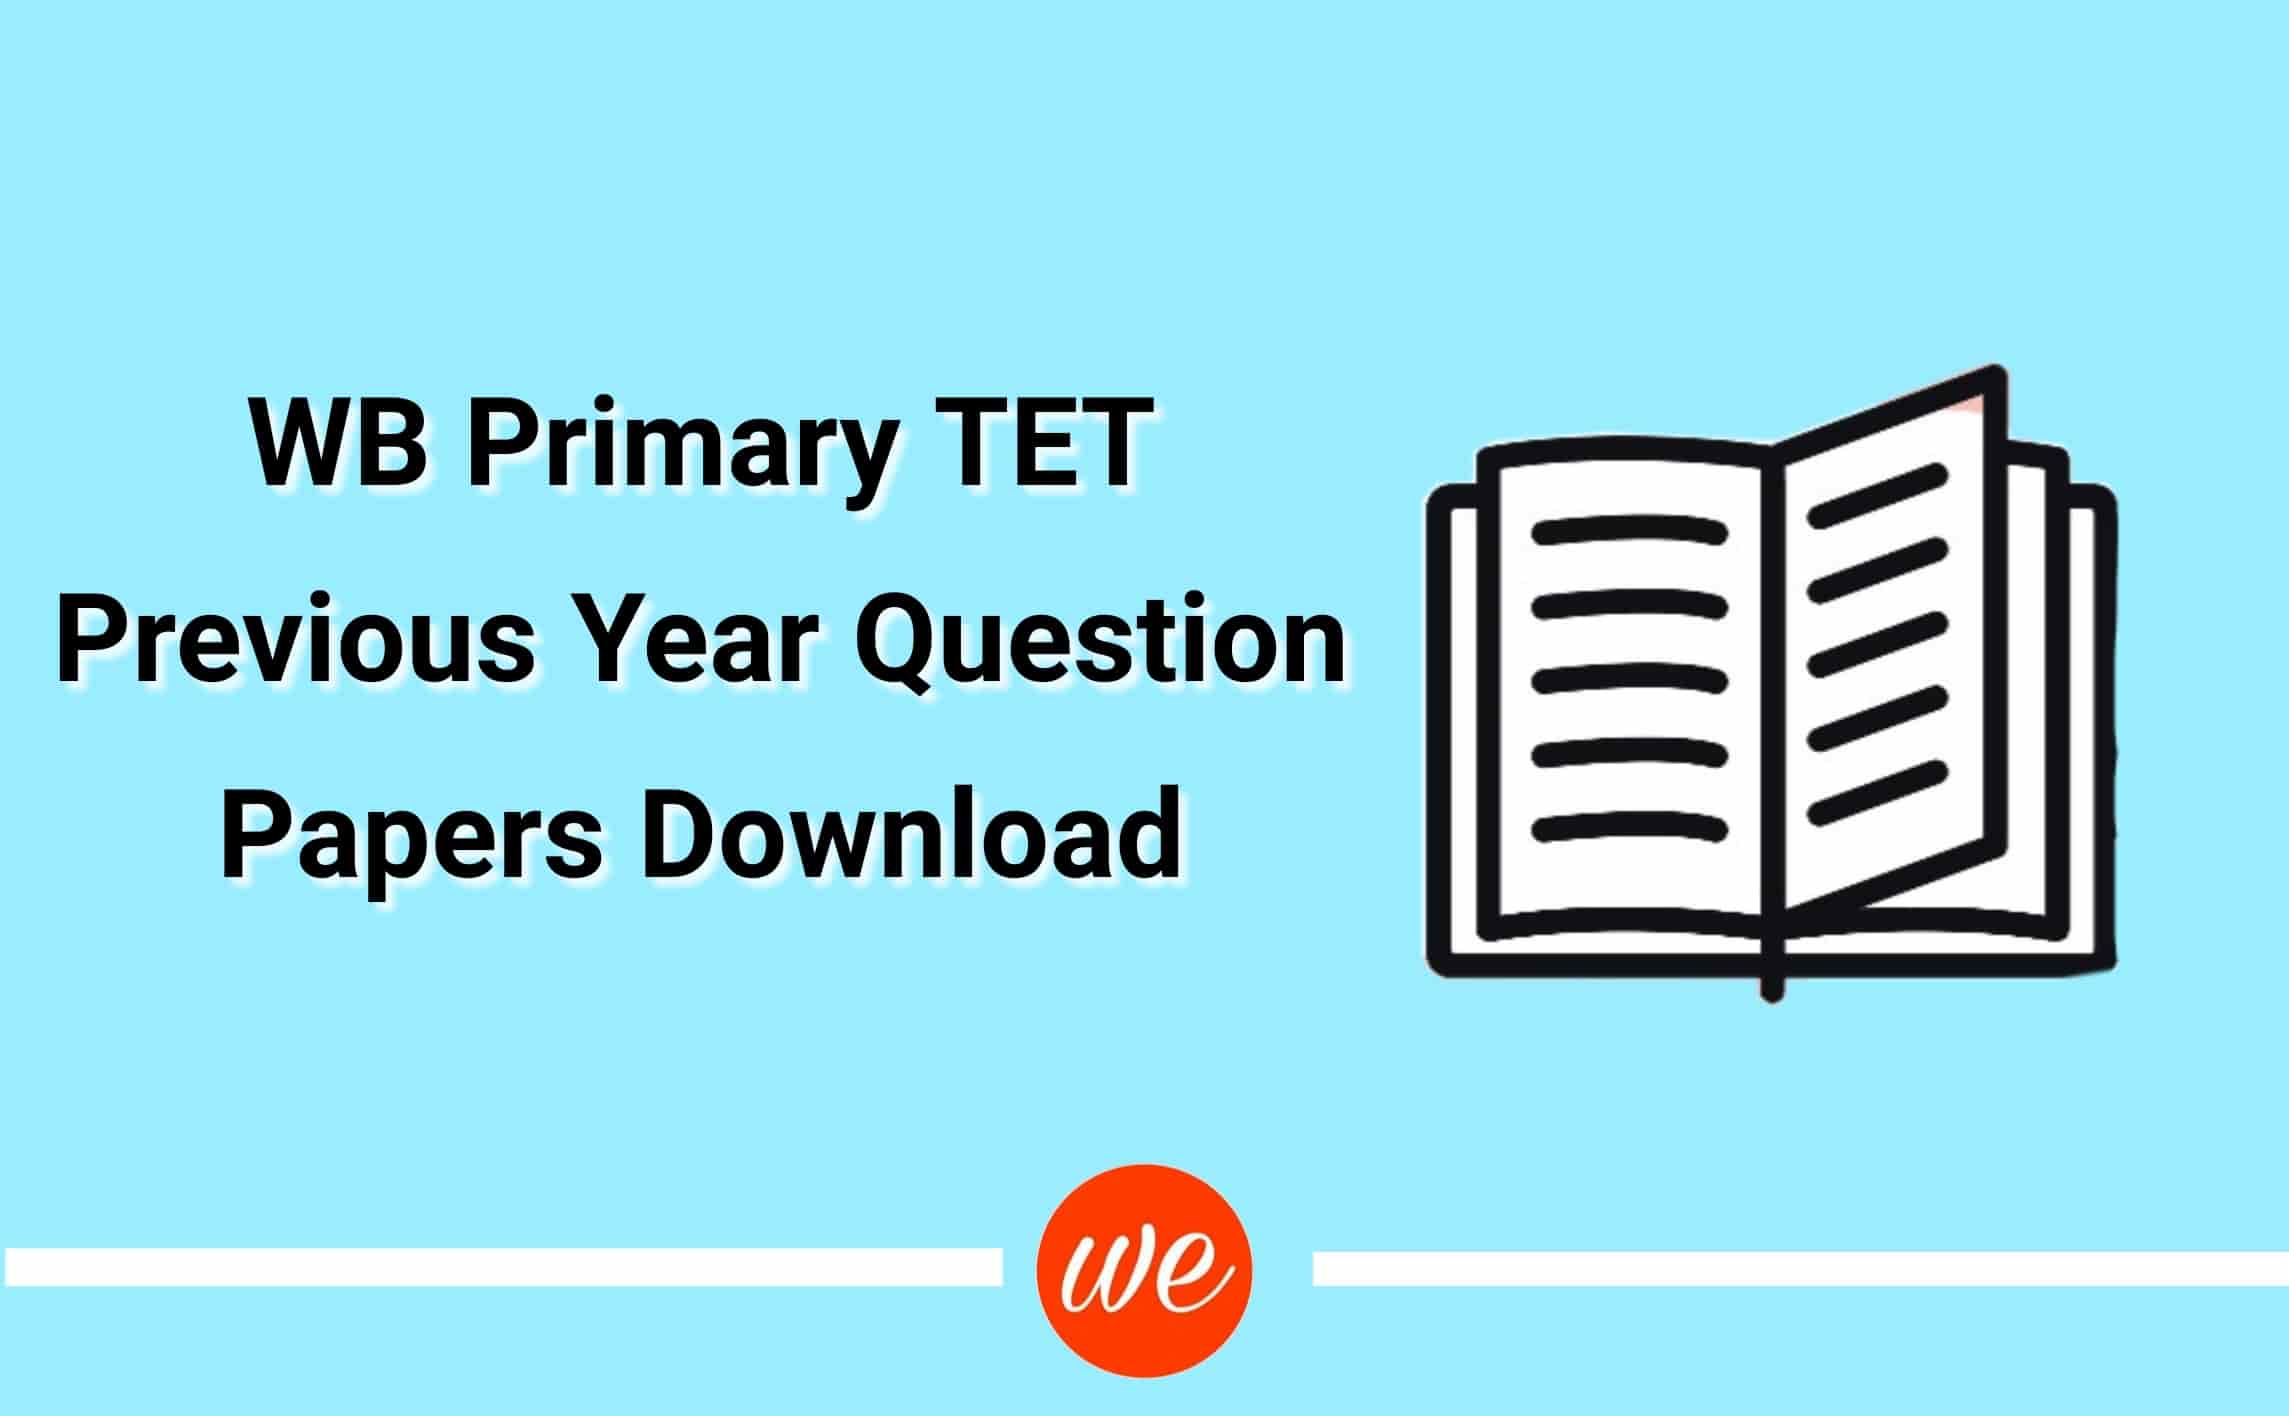 WB Primary TET Previous Year Question Paper Download